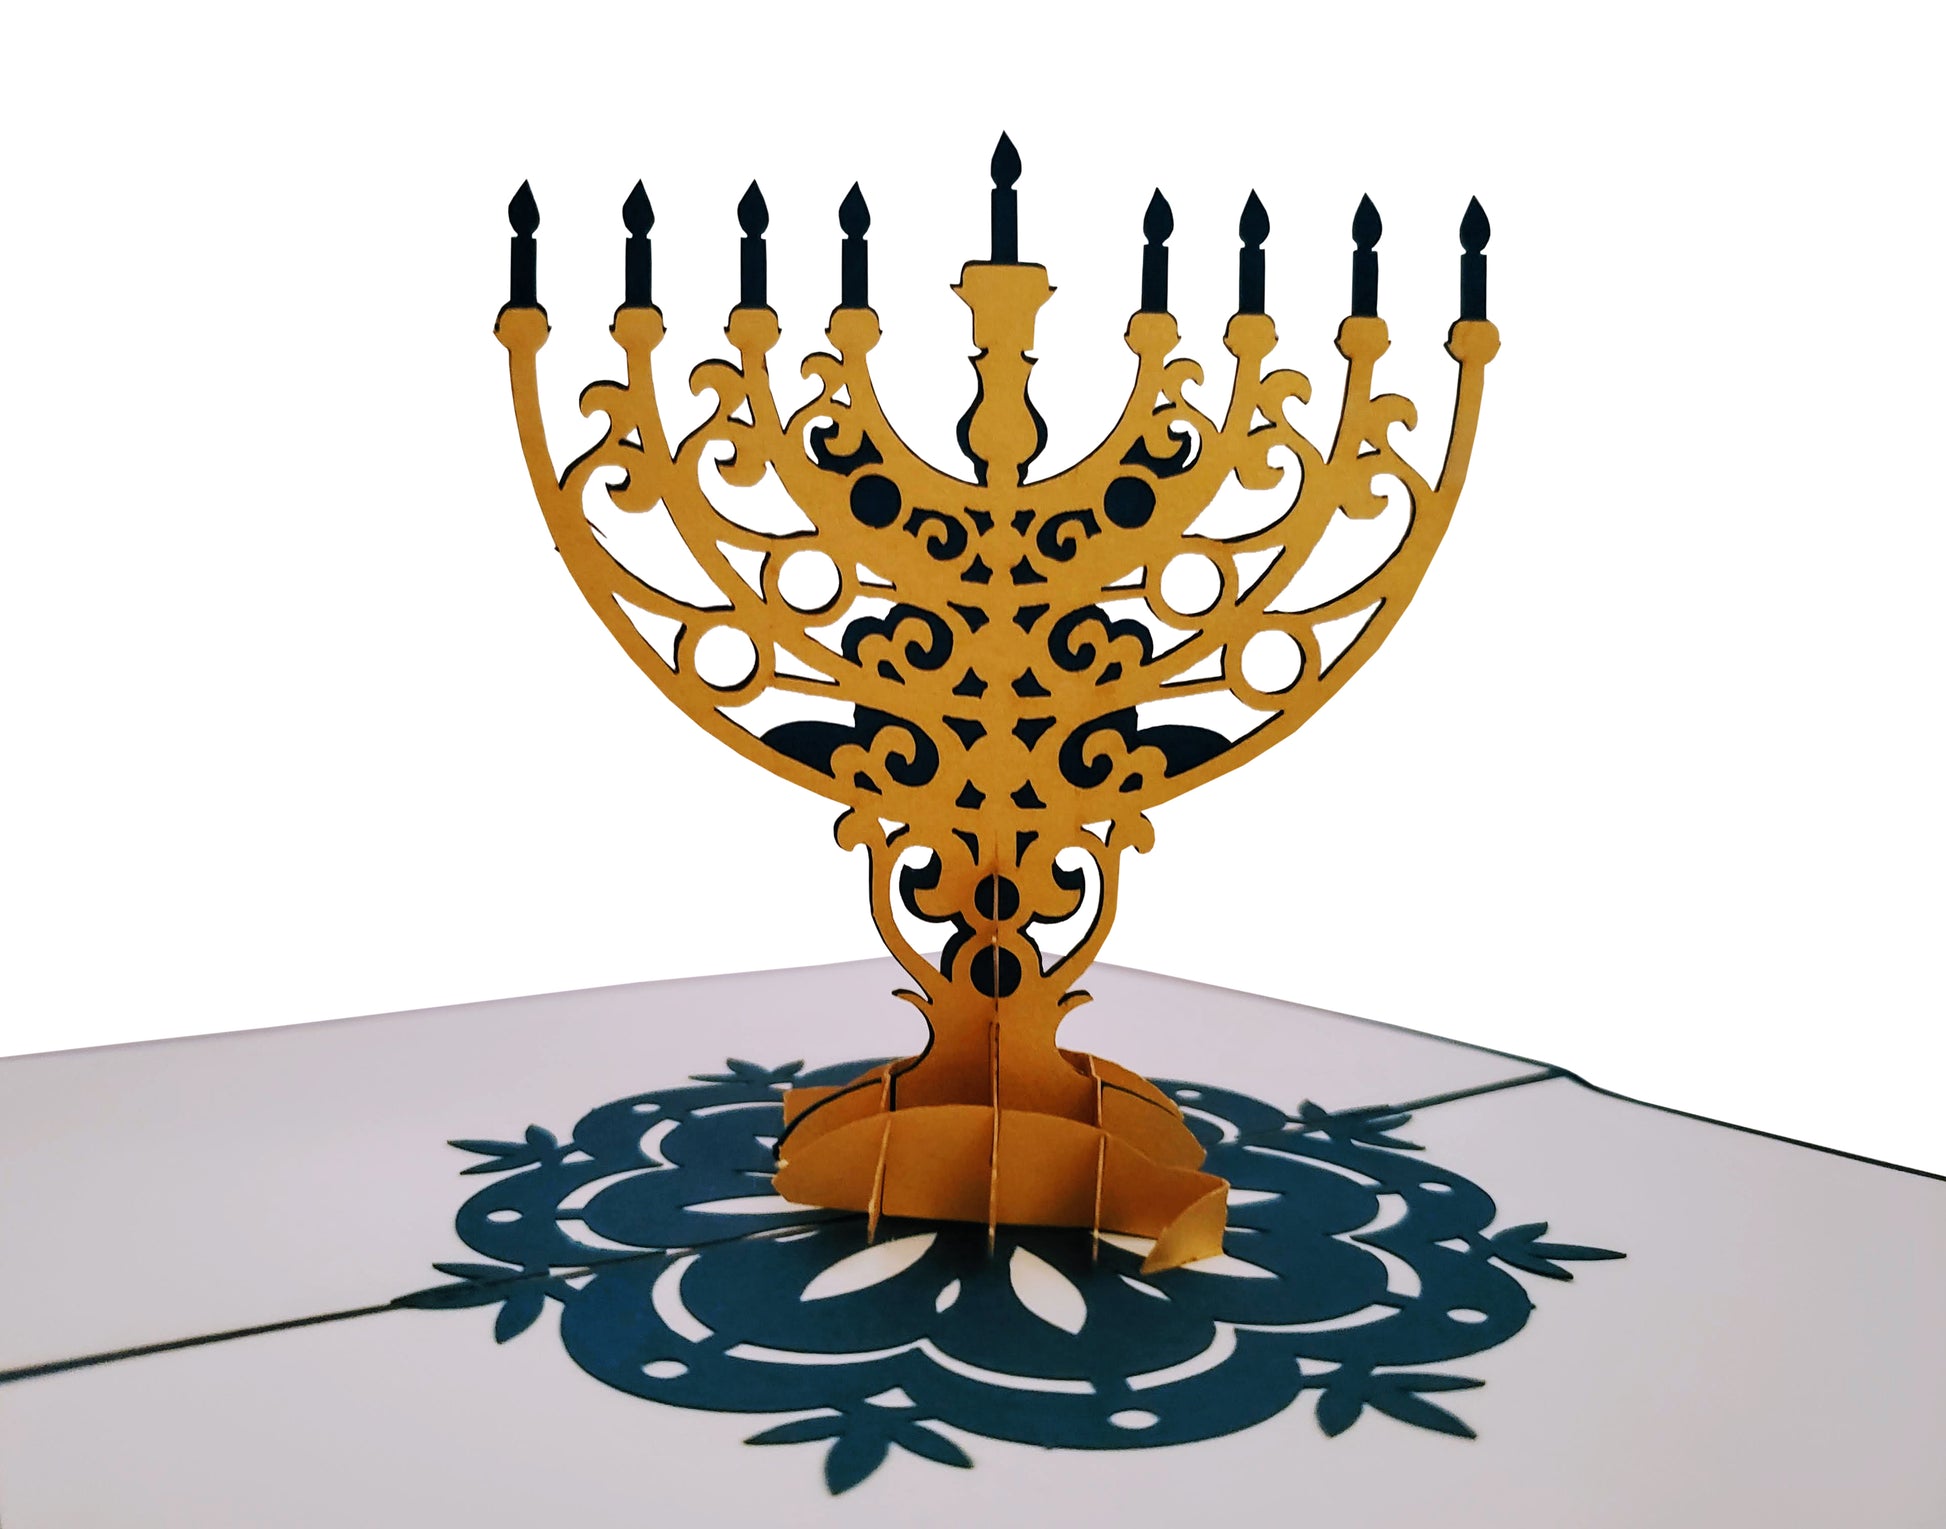 Festive Fancy Menorah 3D Pop Up Greeting - Hanukkah - Special Days - iGifts And Cards